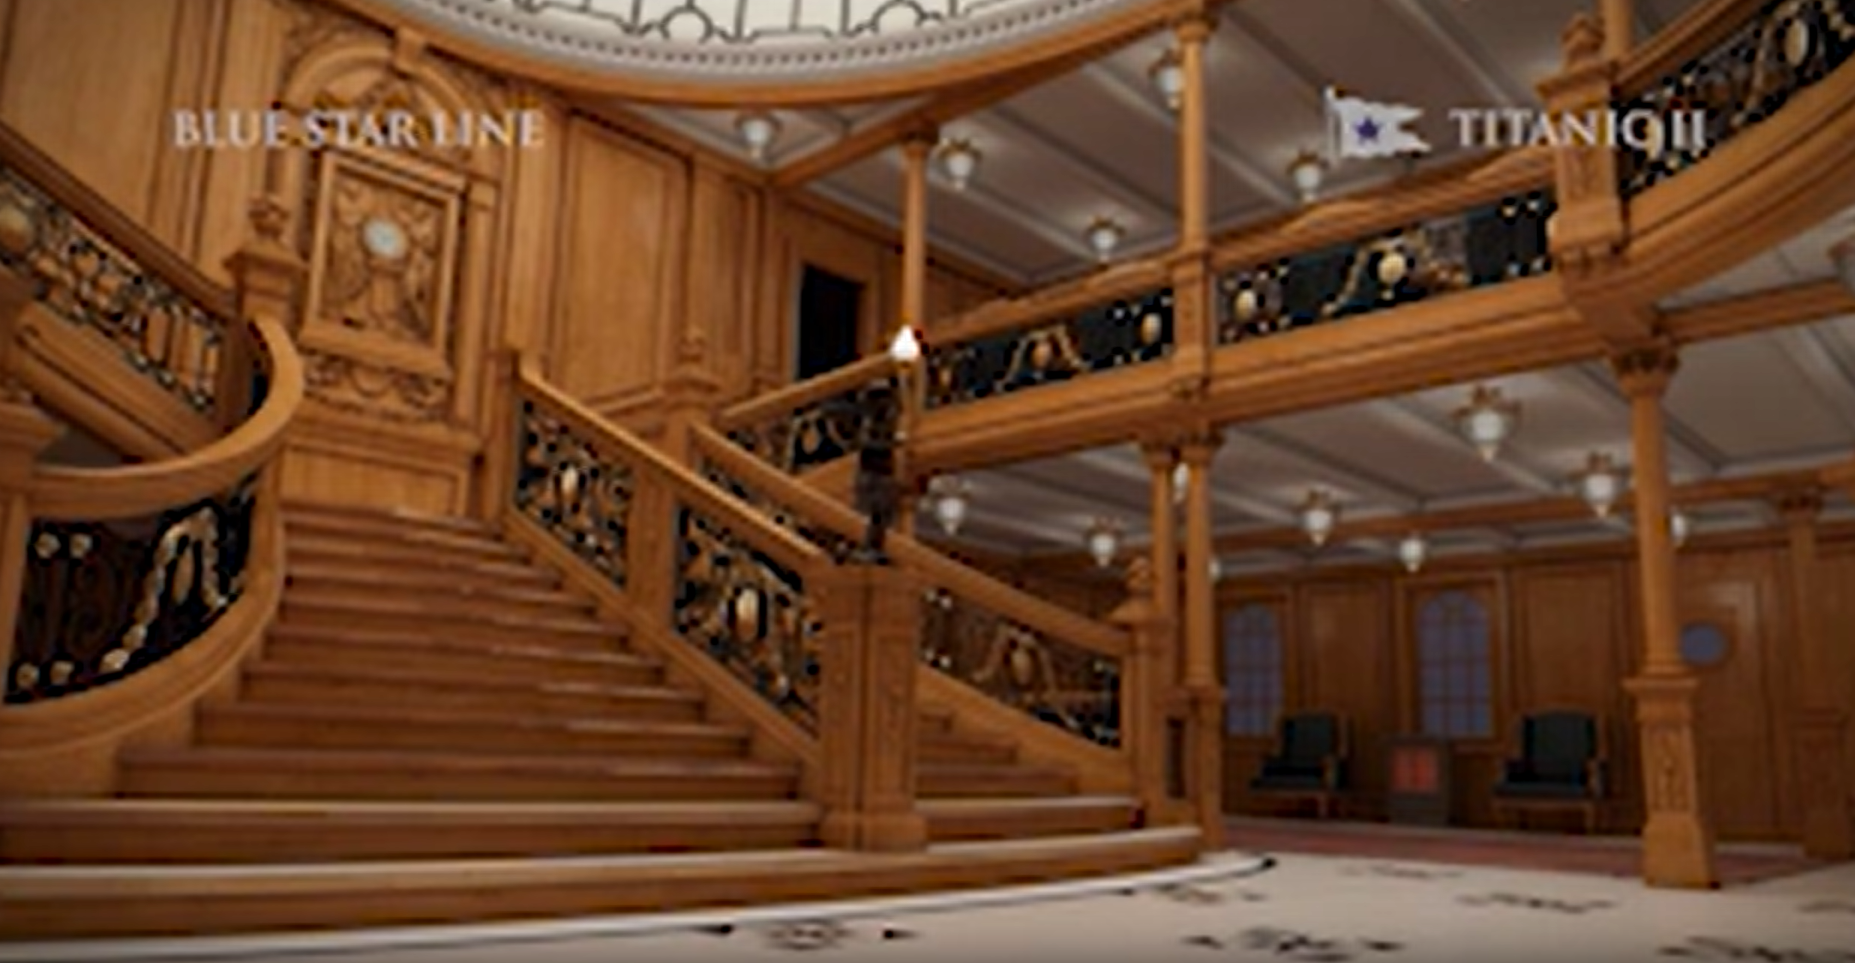 The Grand Staircase on The Titanic II.